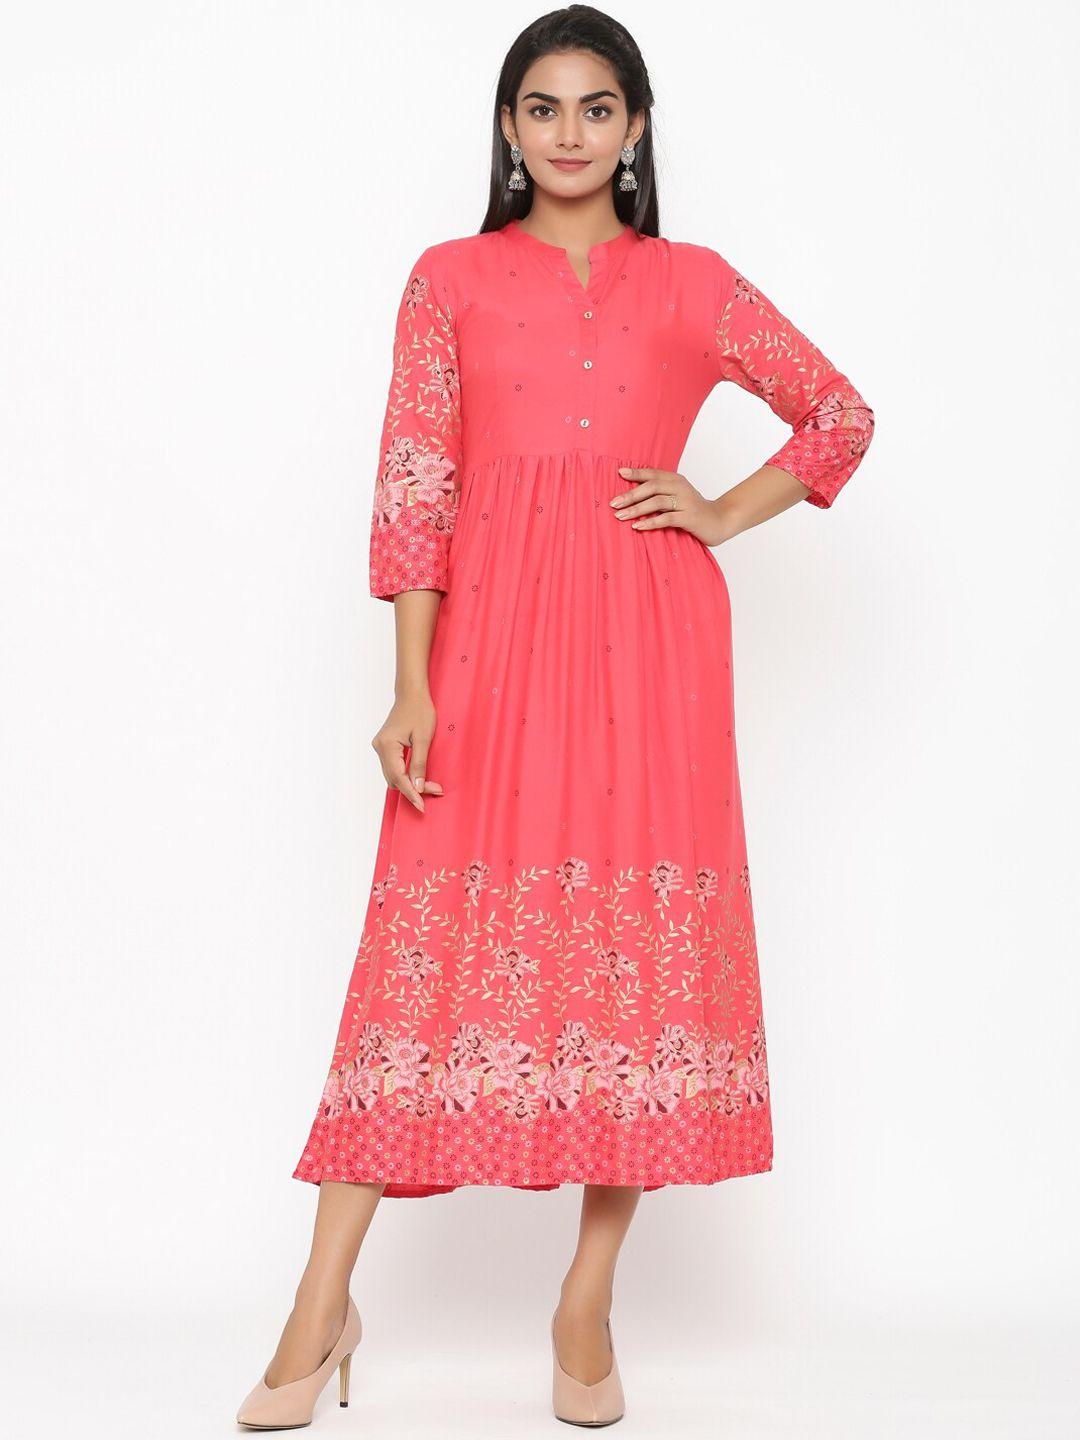 rangmayee women pink printed fit and flare dress